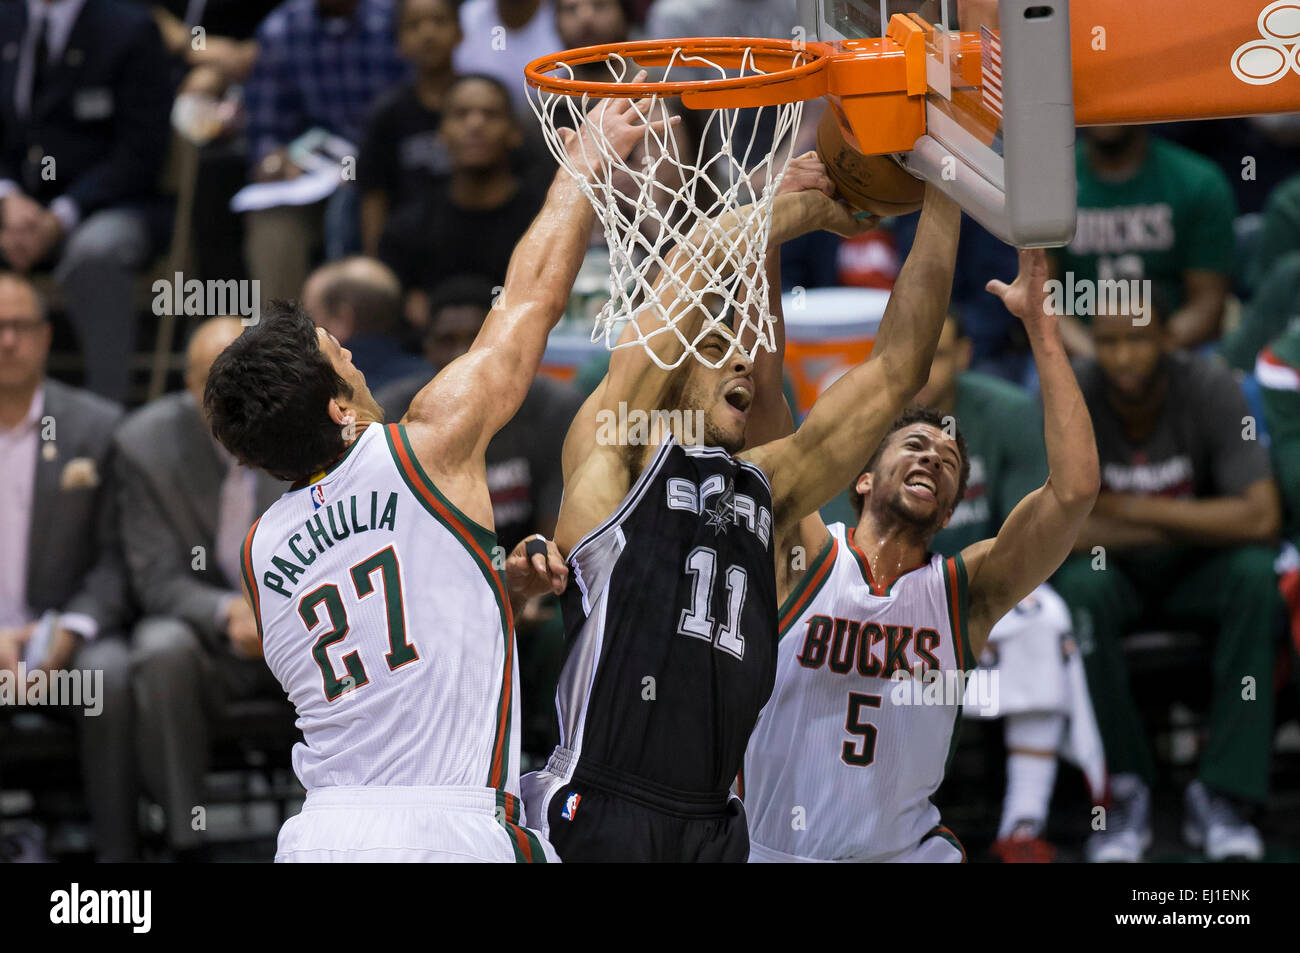 Milwaukee, WI, USA. 18th Mar, 2015. San Antonio Spurs forward Jeff Ayres #11 is fouled going up for a shot during the NBA game between the San Antonio Spurs and the Milwaukee Bucks at the BMO Harris Bradley Center in Milwaukee, WI. Spurs defeated the Bucks 114-103. John Fisher/CSM/Alamy Live News Stock Photo